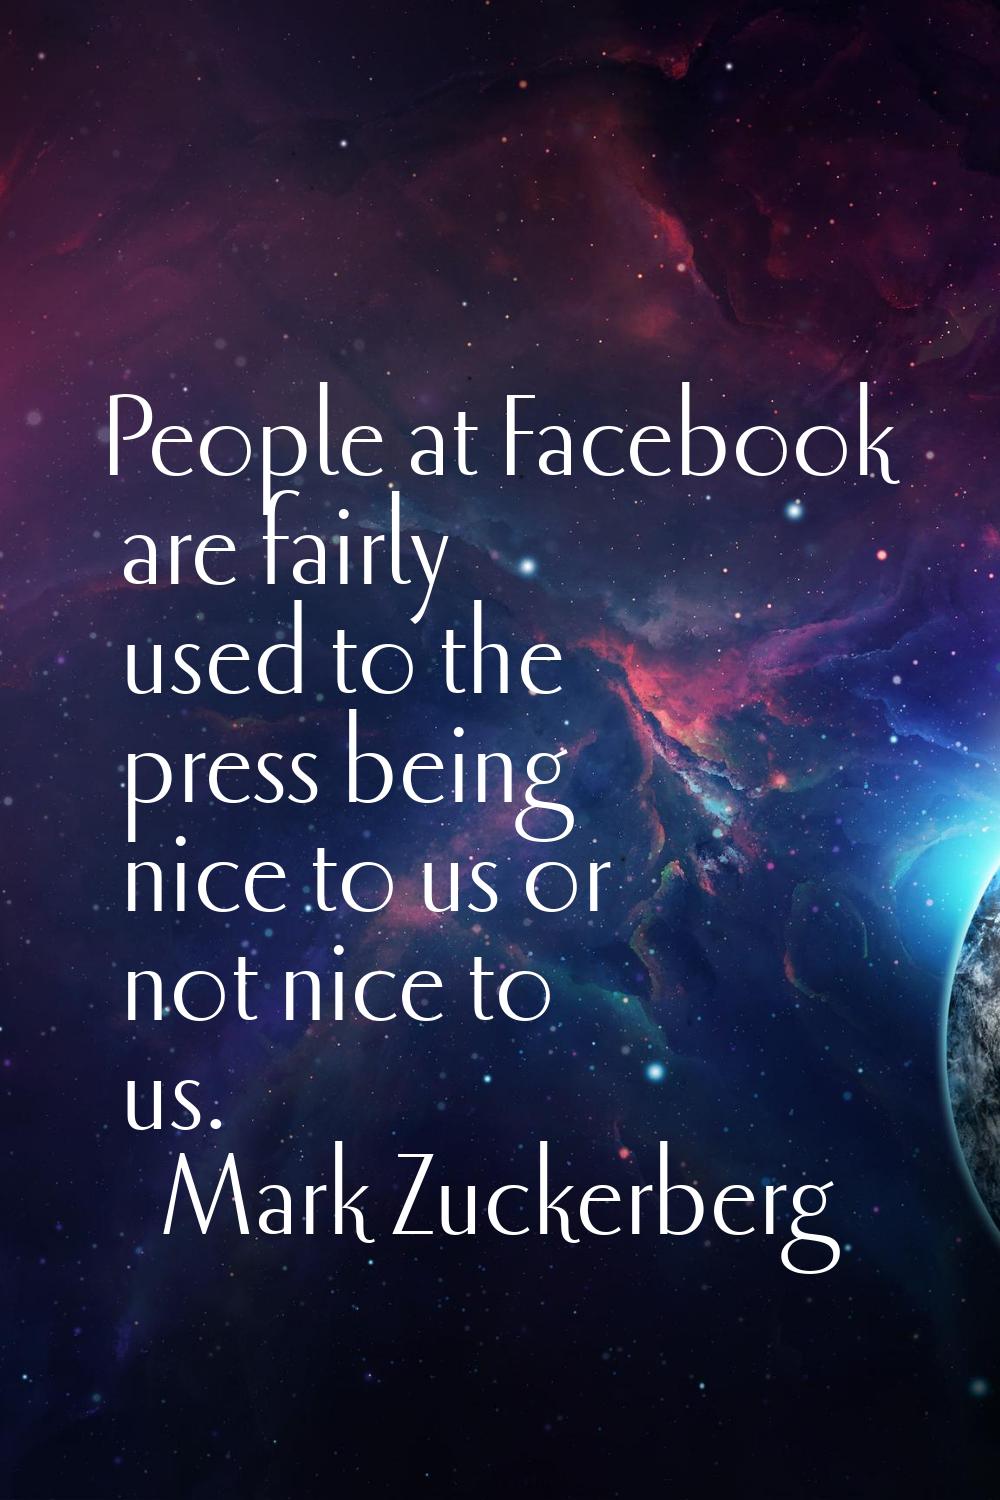 People at Facebook are fairly used to the press being nice to us or not nice to us.